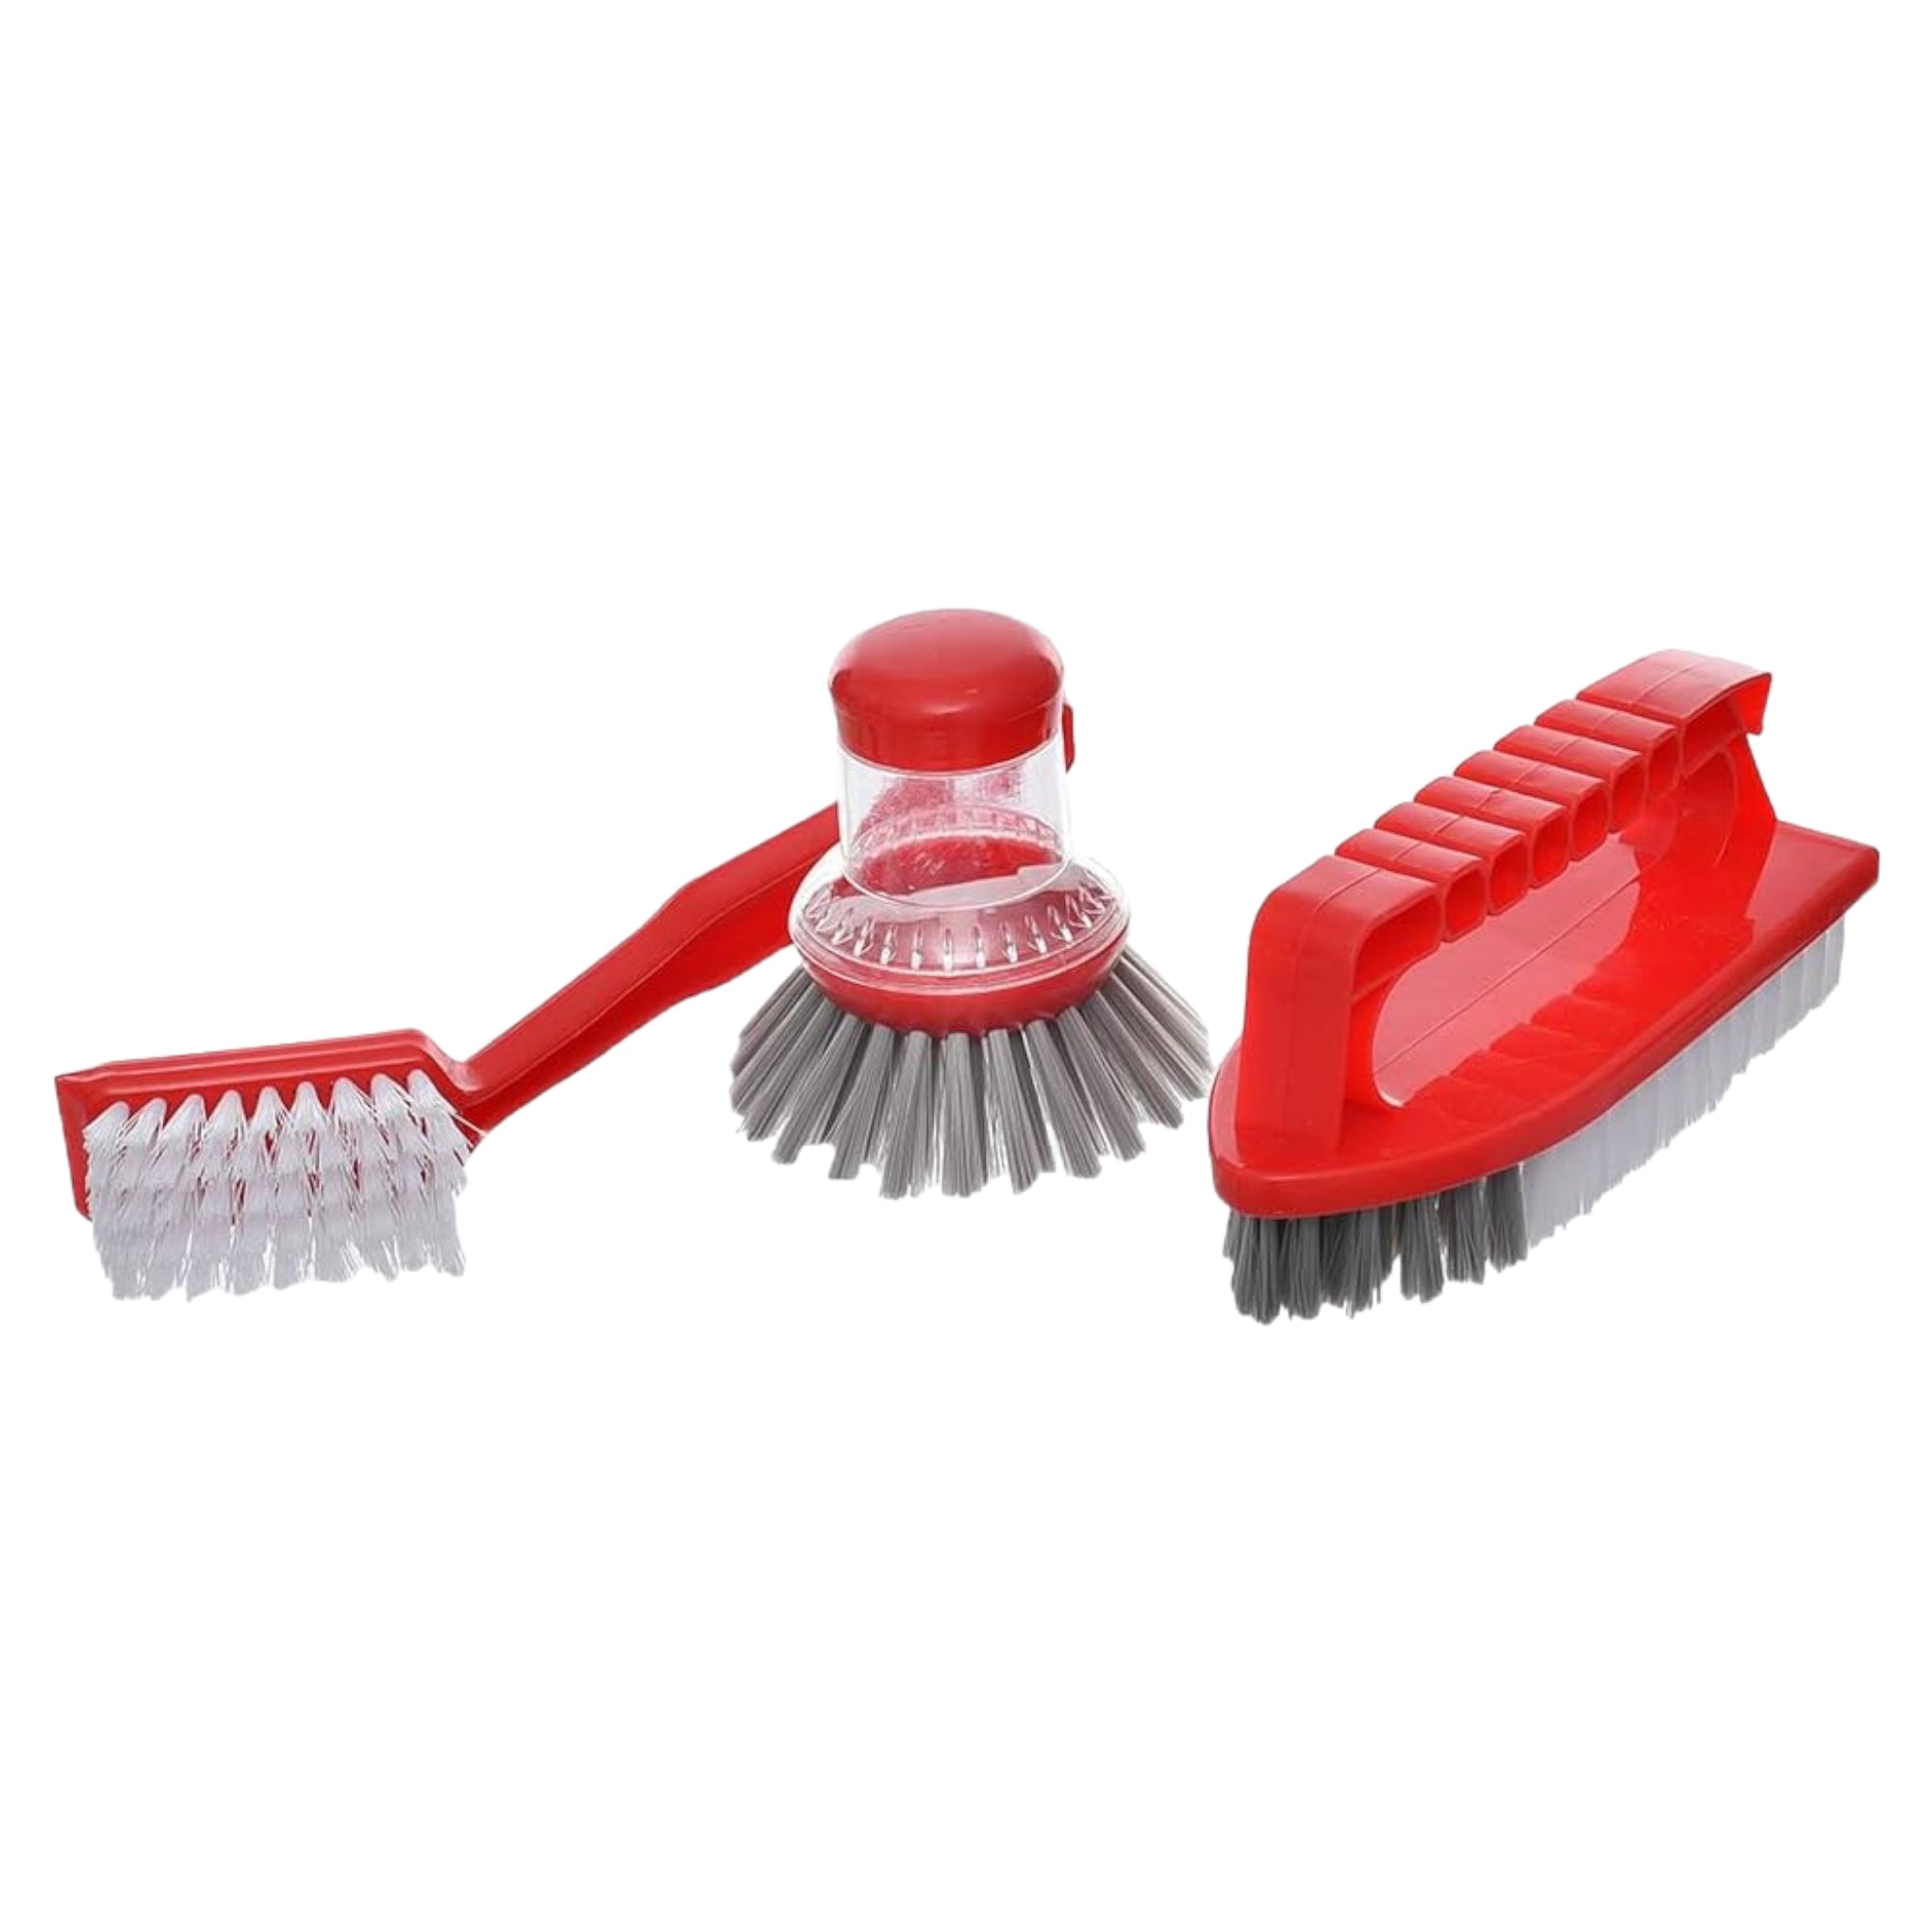 Liao Cleaning 5pc Set